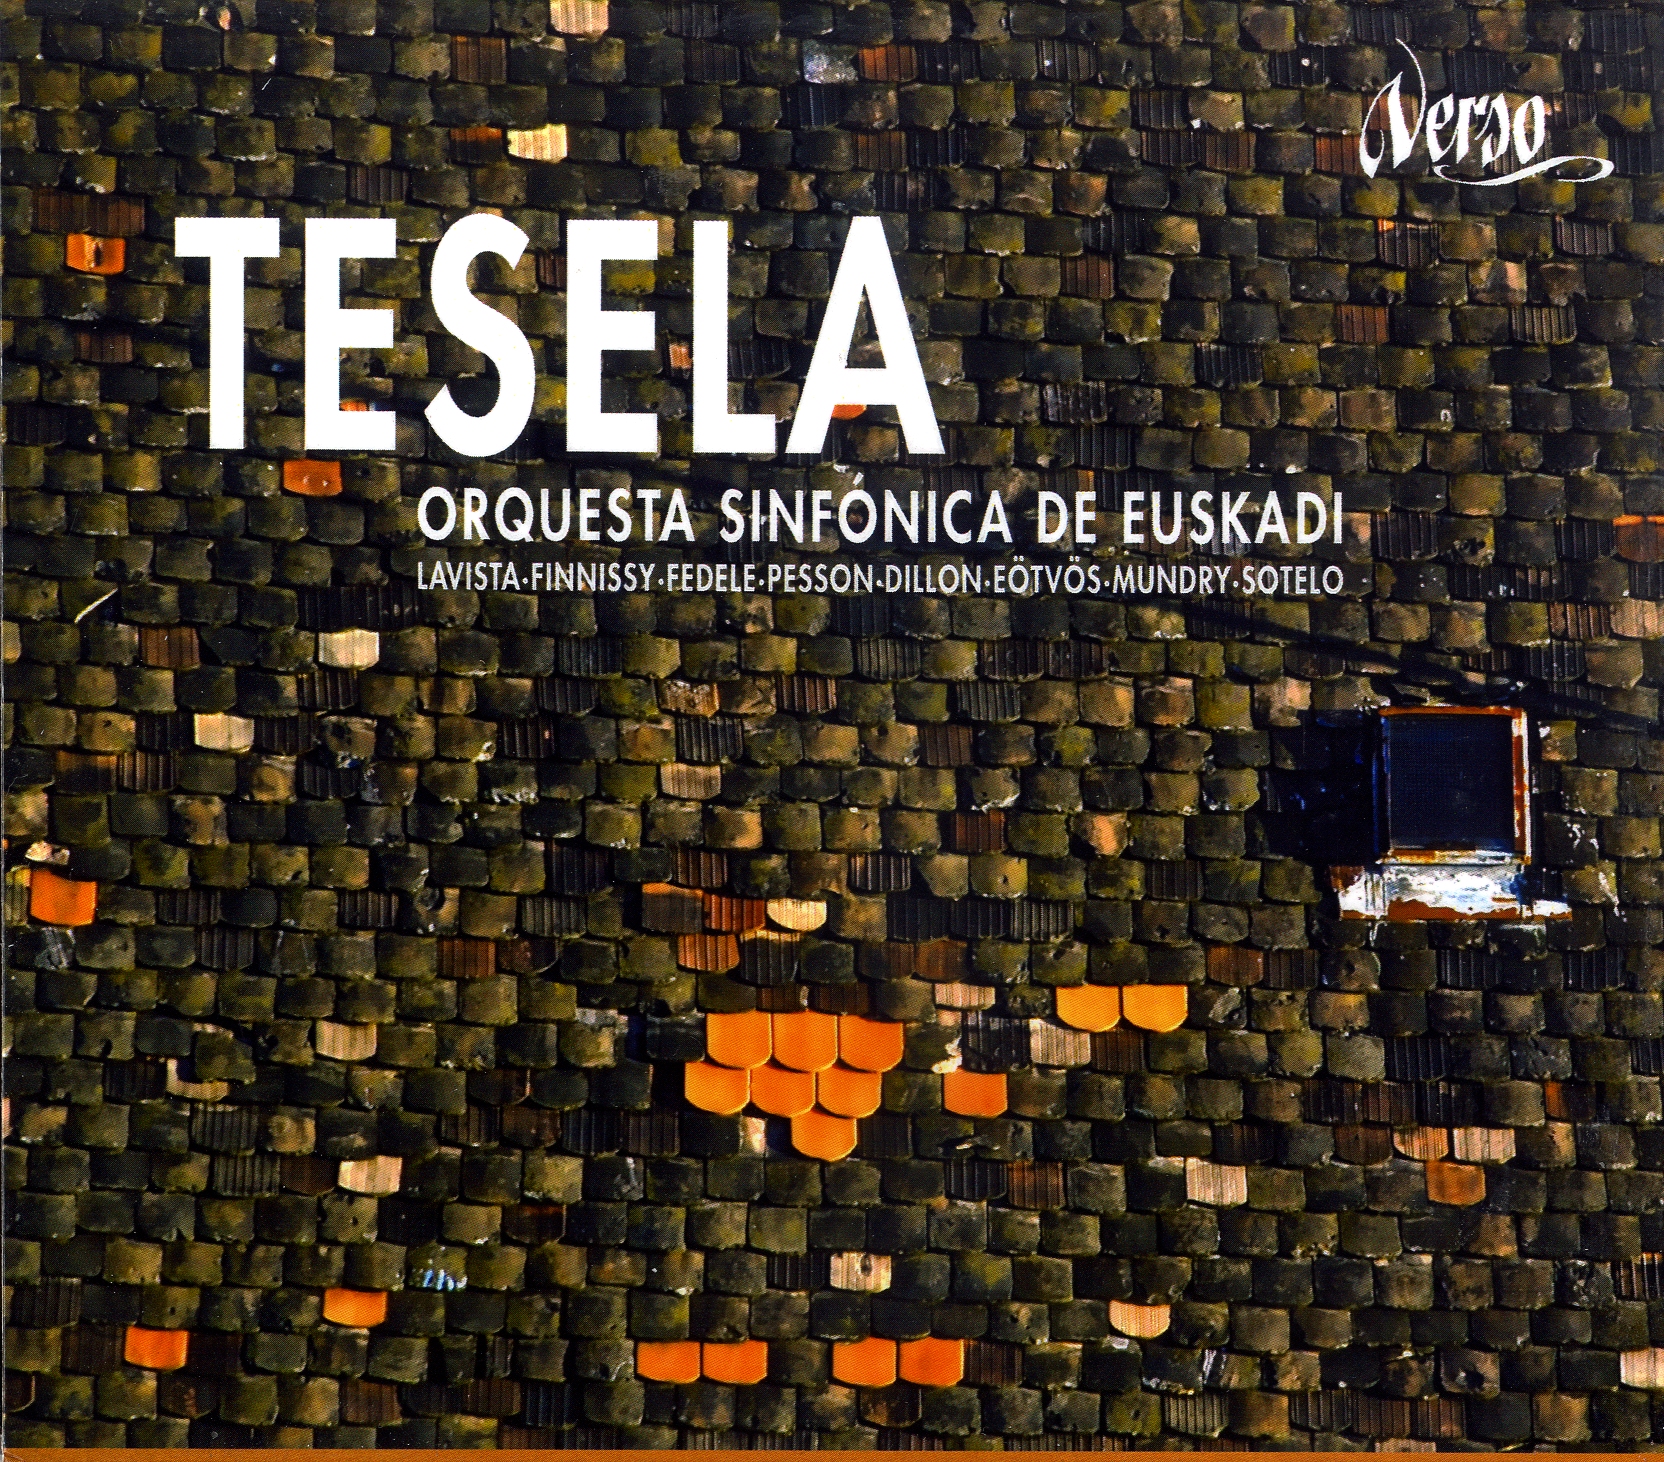 Tesela / The gliding of the eagle in the skies